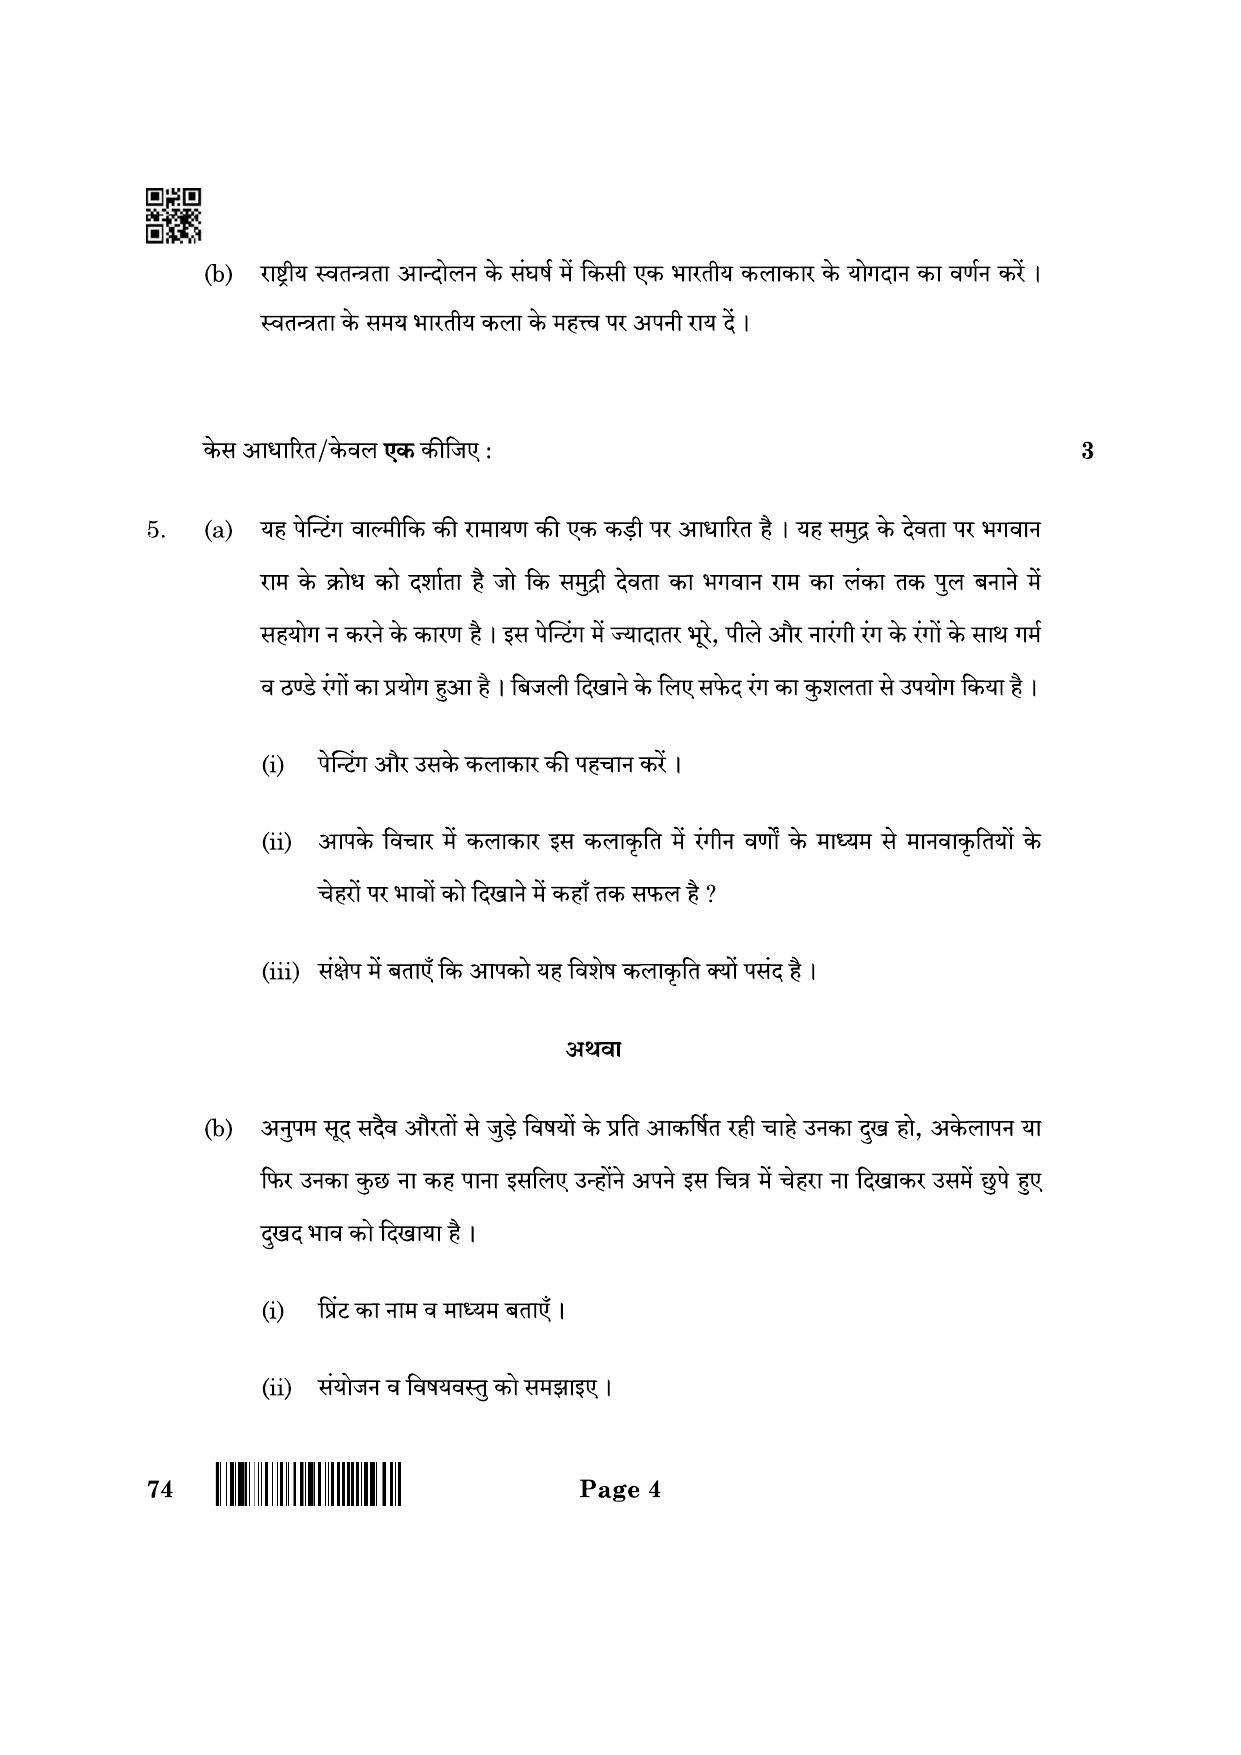 CBSE Class 12 74_Graphics 2022 Question Paper - Page 4